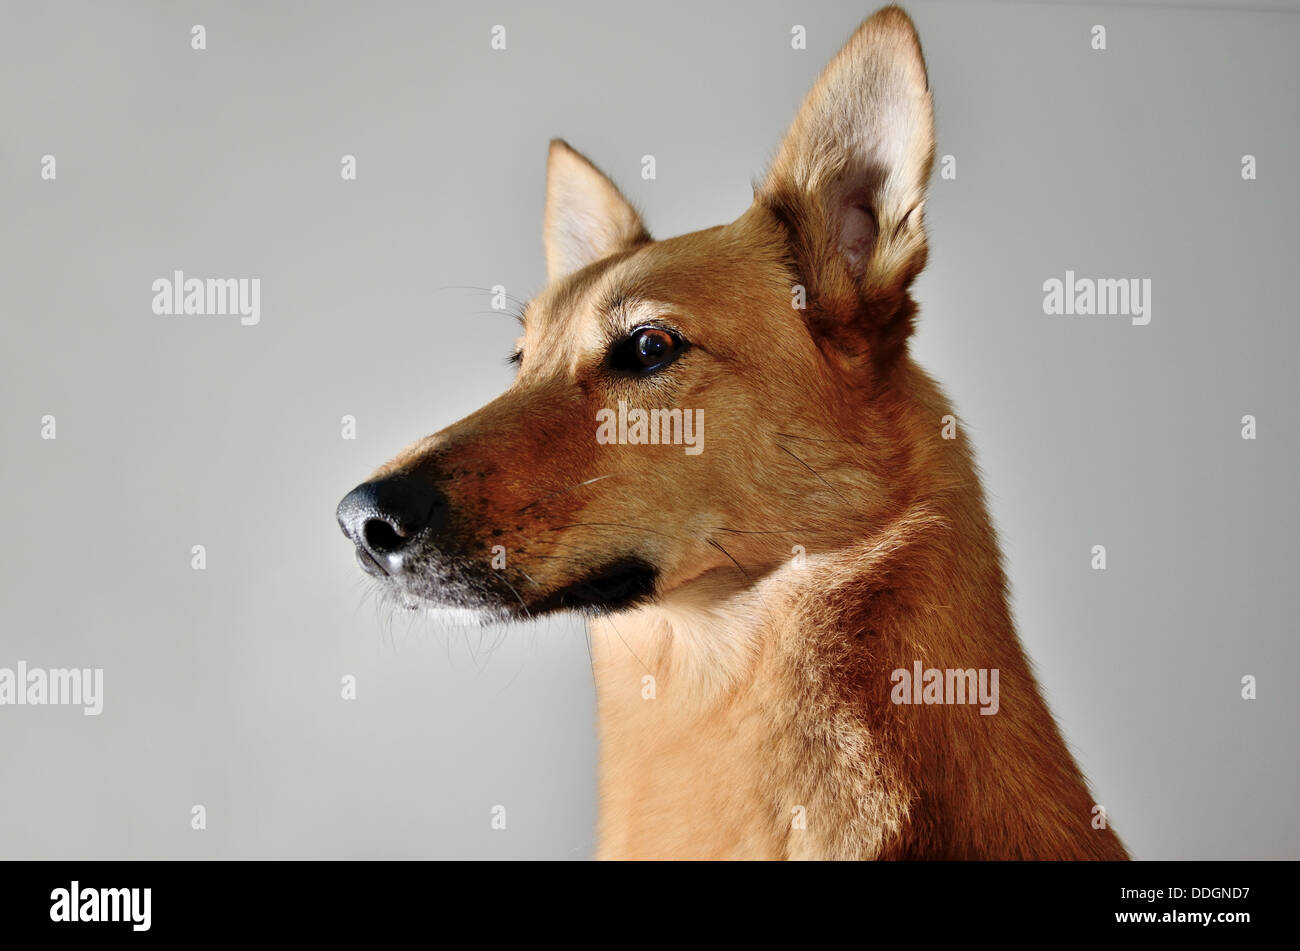 mutts face on a gray background, horizontal Stock Photo